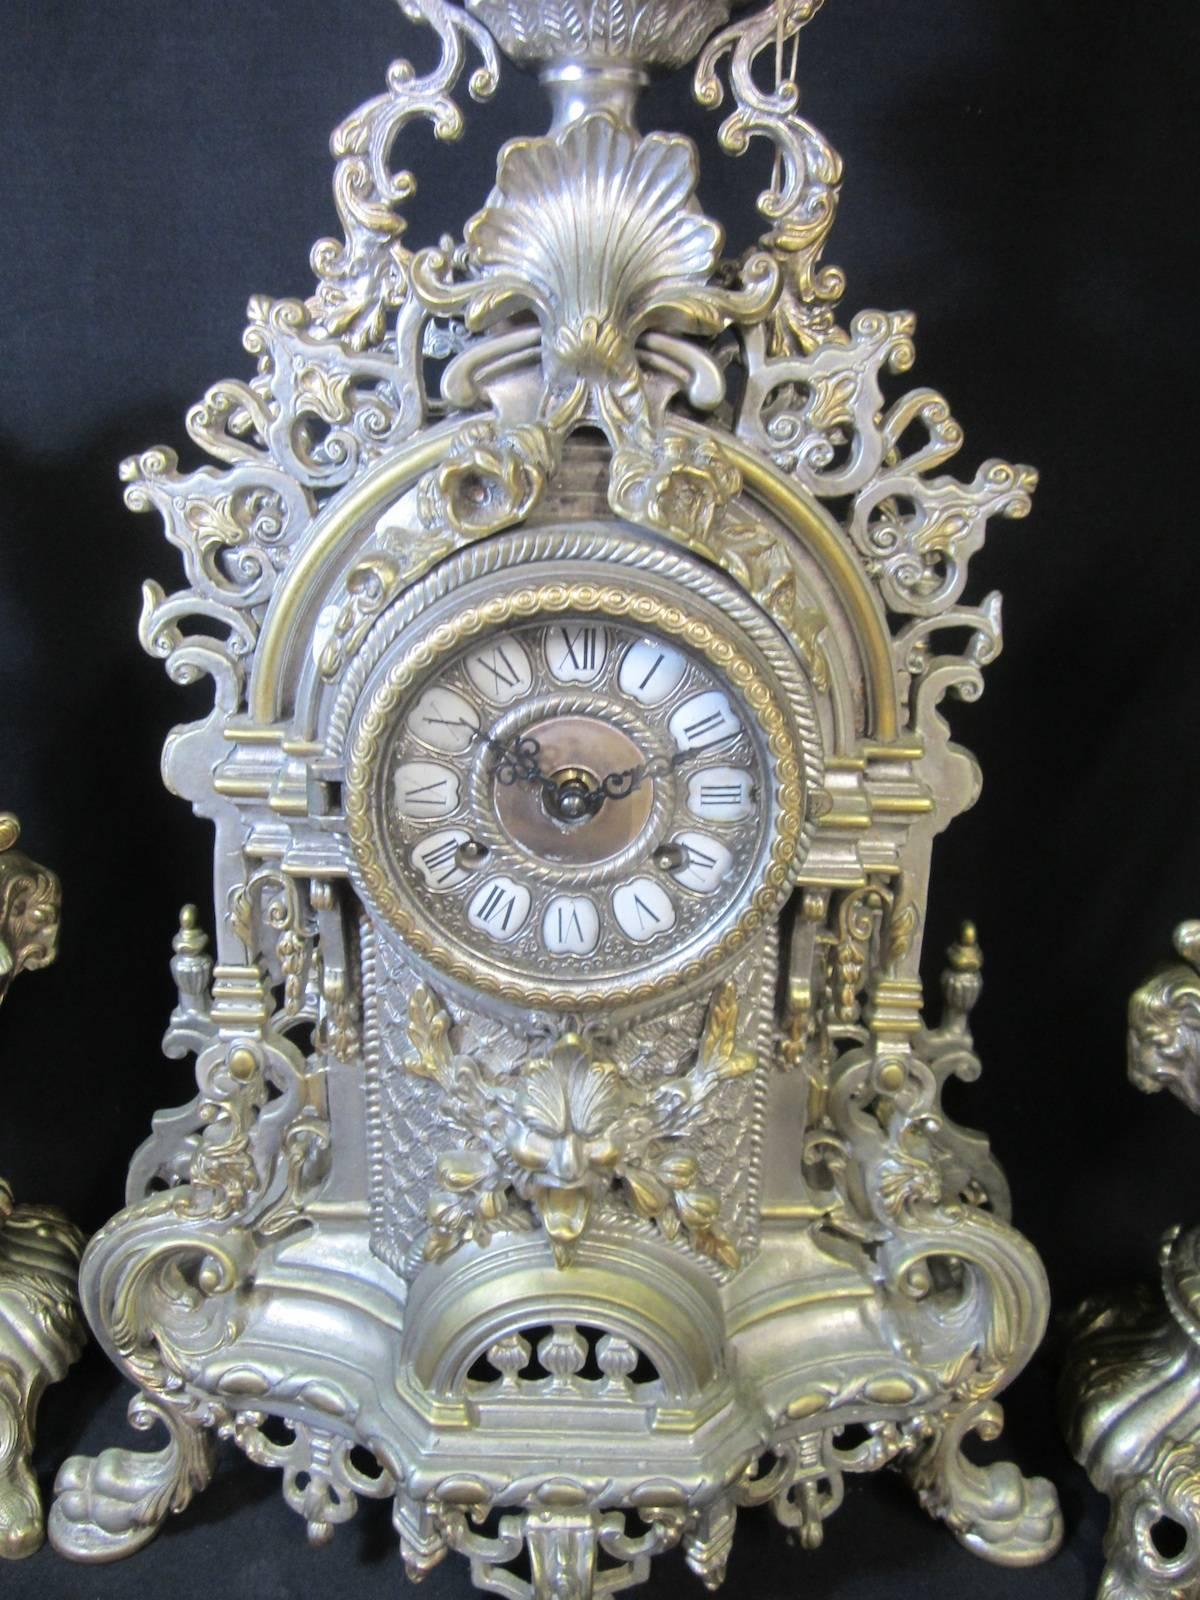 Italian three-piece brass garniture clock set with a German balance movement.
Chimes on the hour and half hour.
circa 1975,
Measures: Clock is 60cm high,
Garnitures are 43cm high
Three-piece set weighs 26kg.